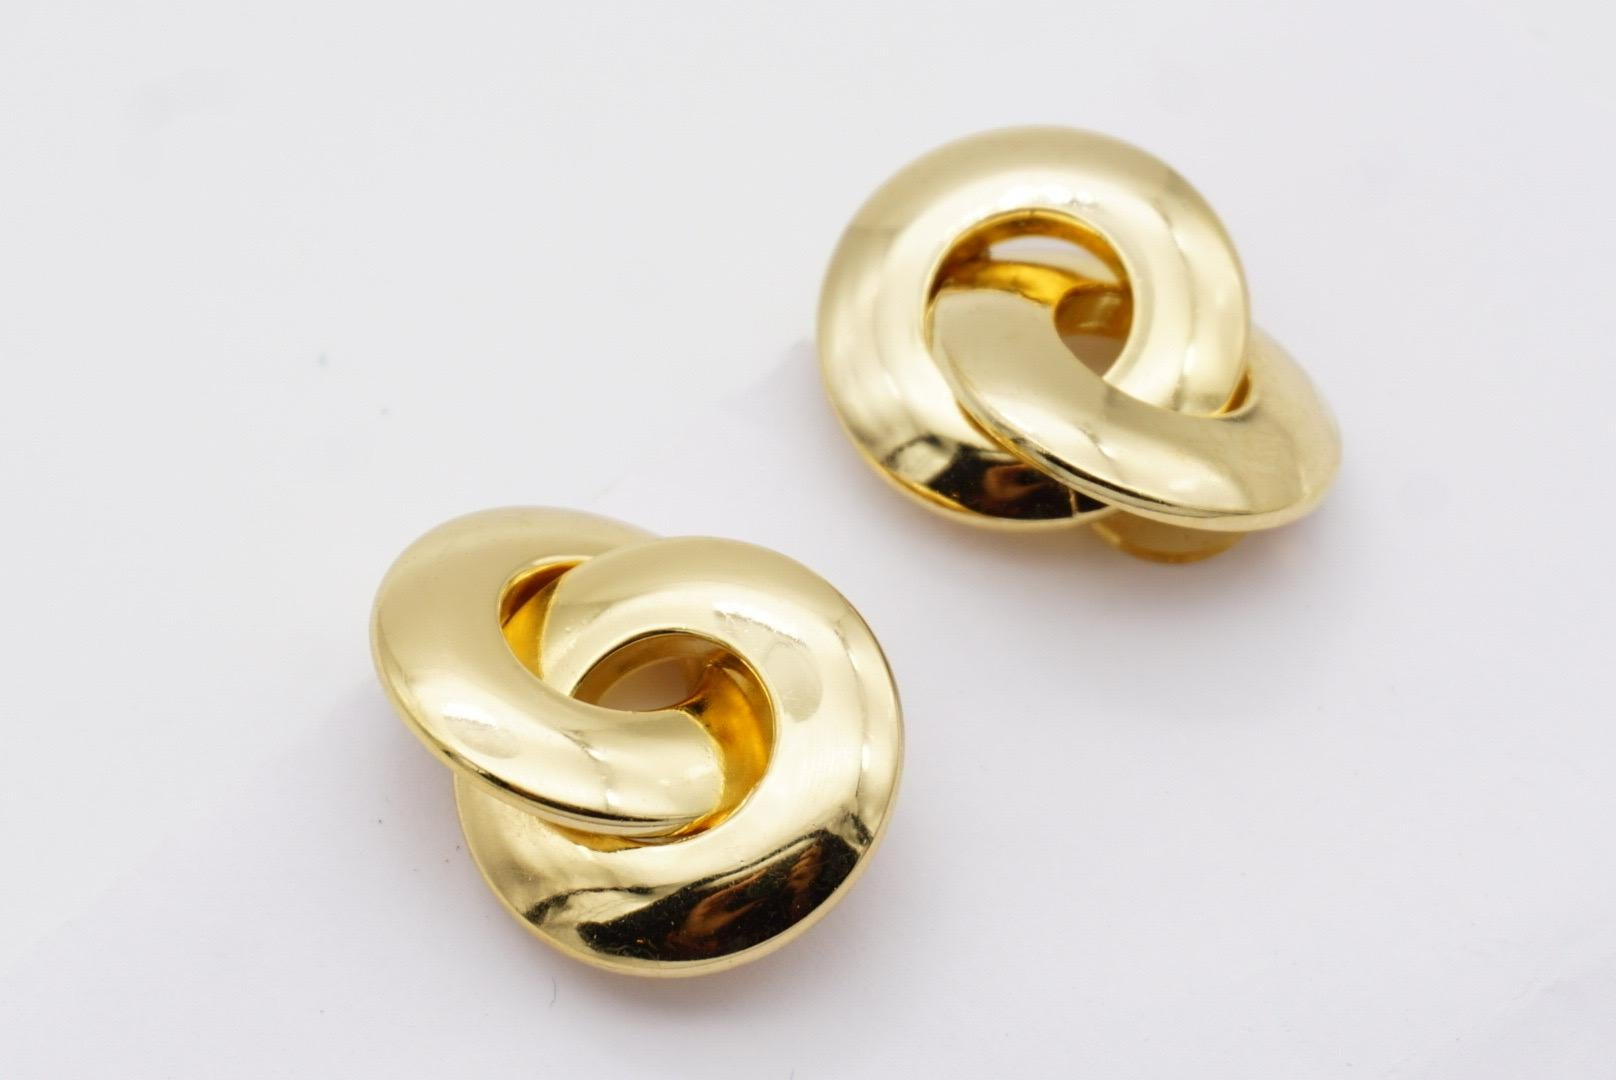 Christian Dior Vintage 1980s Large Glow Twist Intertwined Knot Clip Earrings For Sale 8